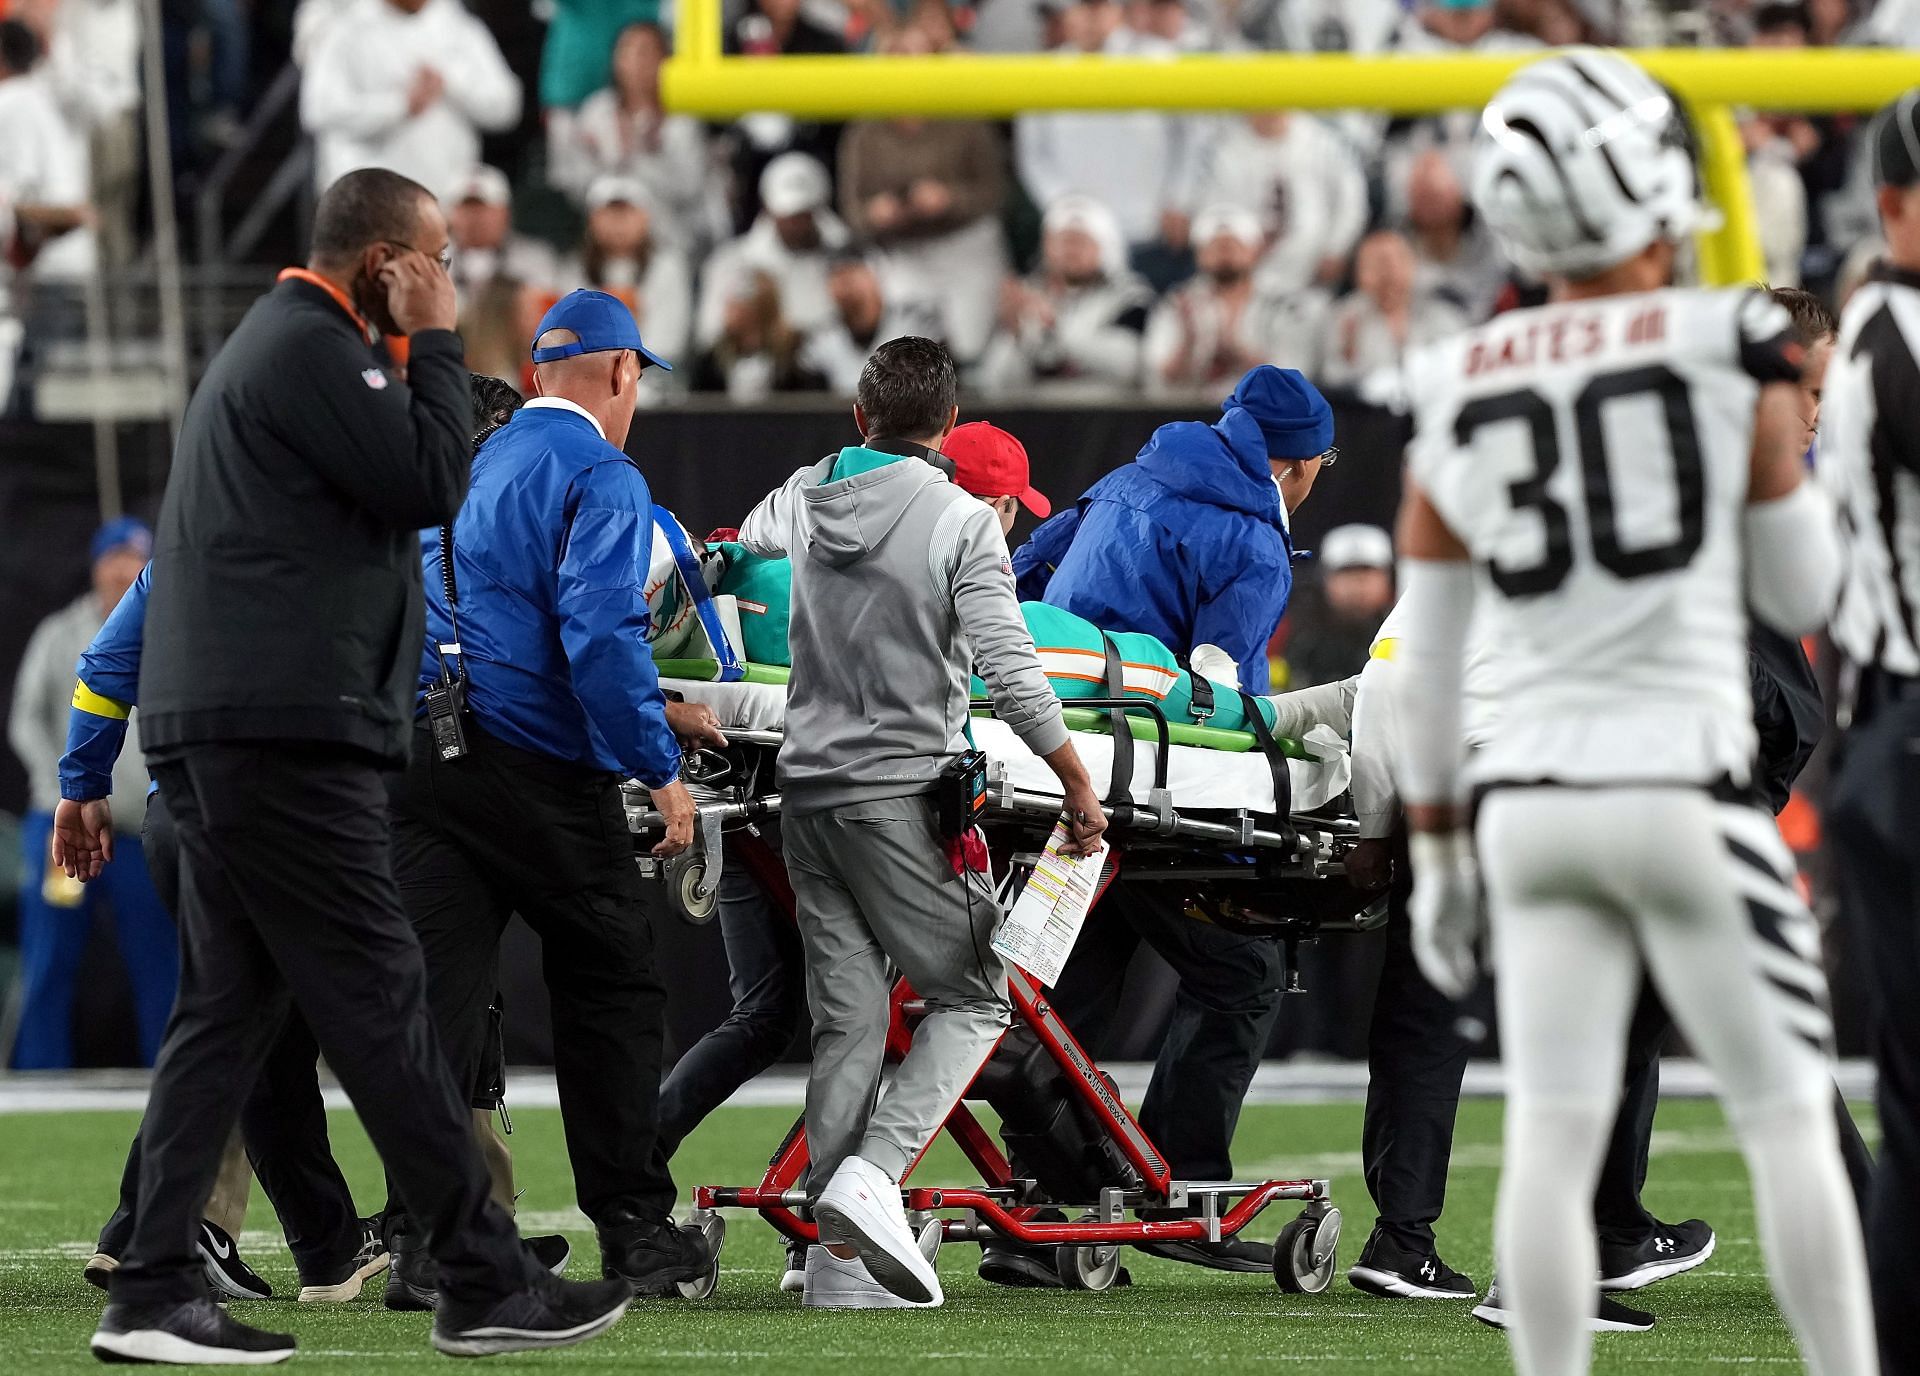 Tua Tagovailoa was injured during a Thursday night game.